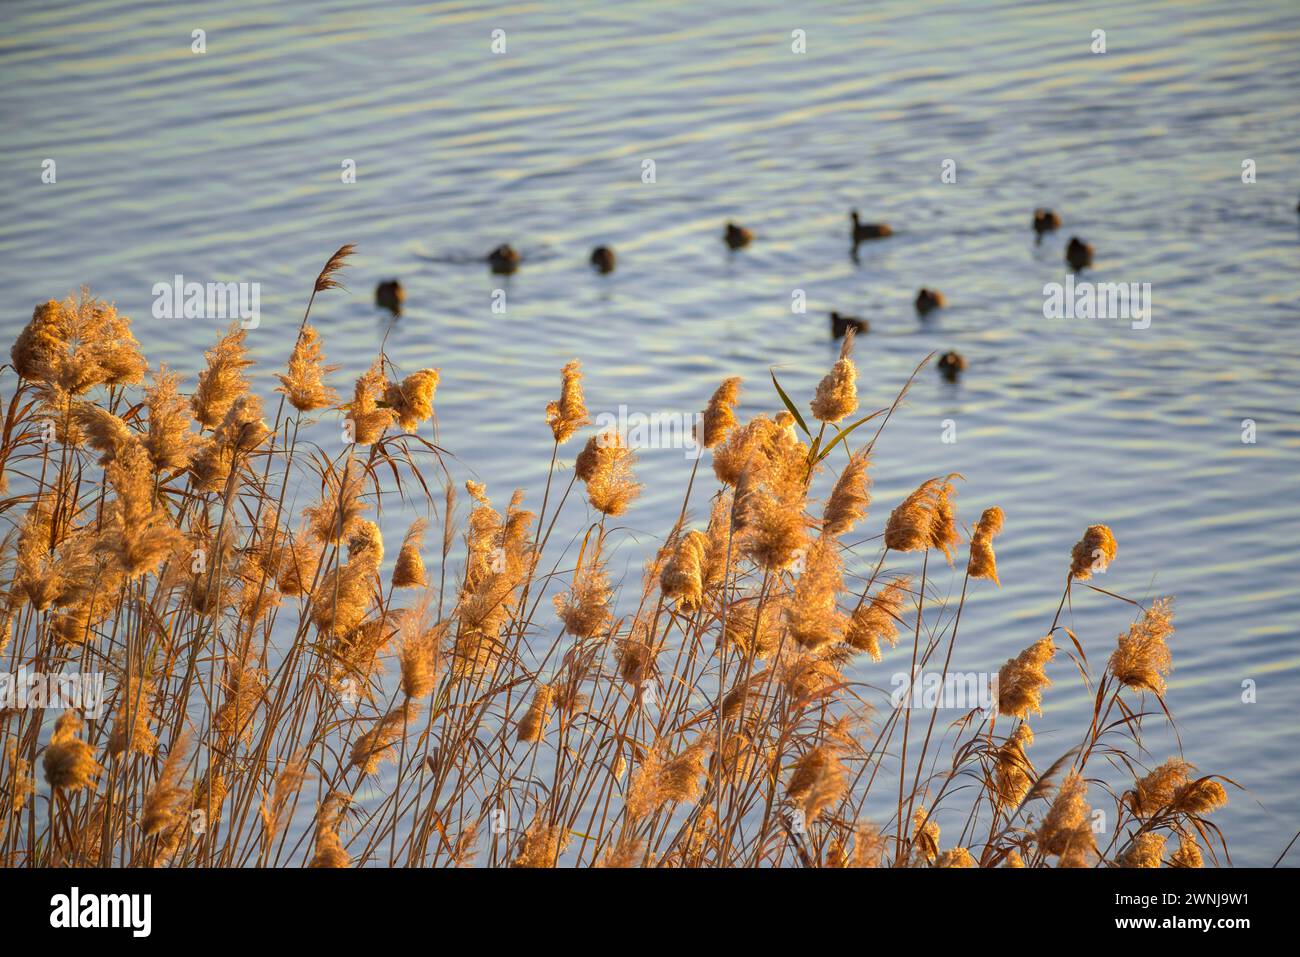 Some common coots (Fulica atra) at sunrise in the Ebro river seen from the Zigurat viewpoint at the mouth of the Ebro River. Tarragona Catalonia Spain Stock Photo